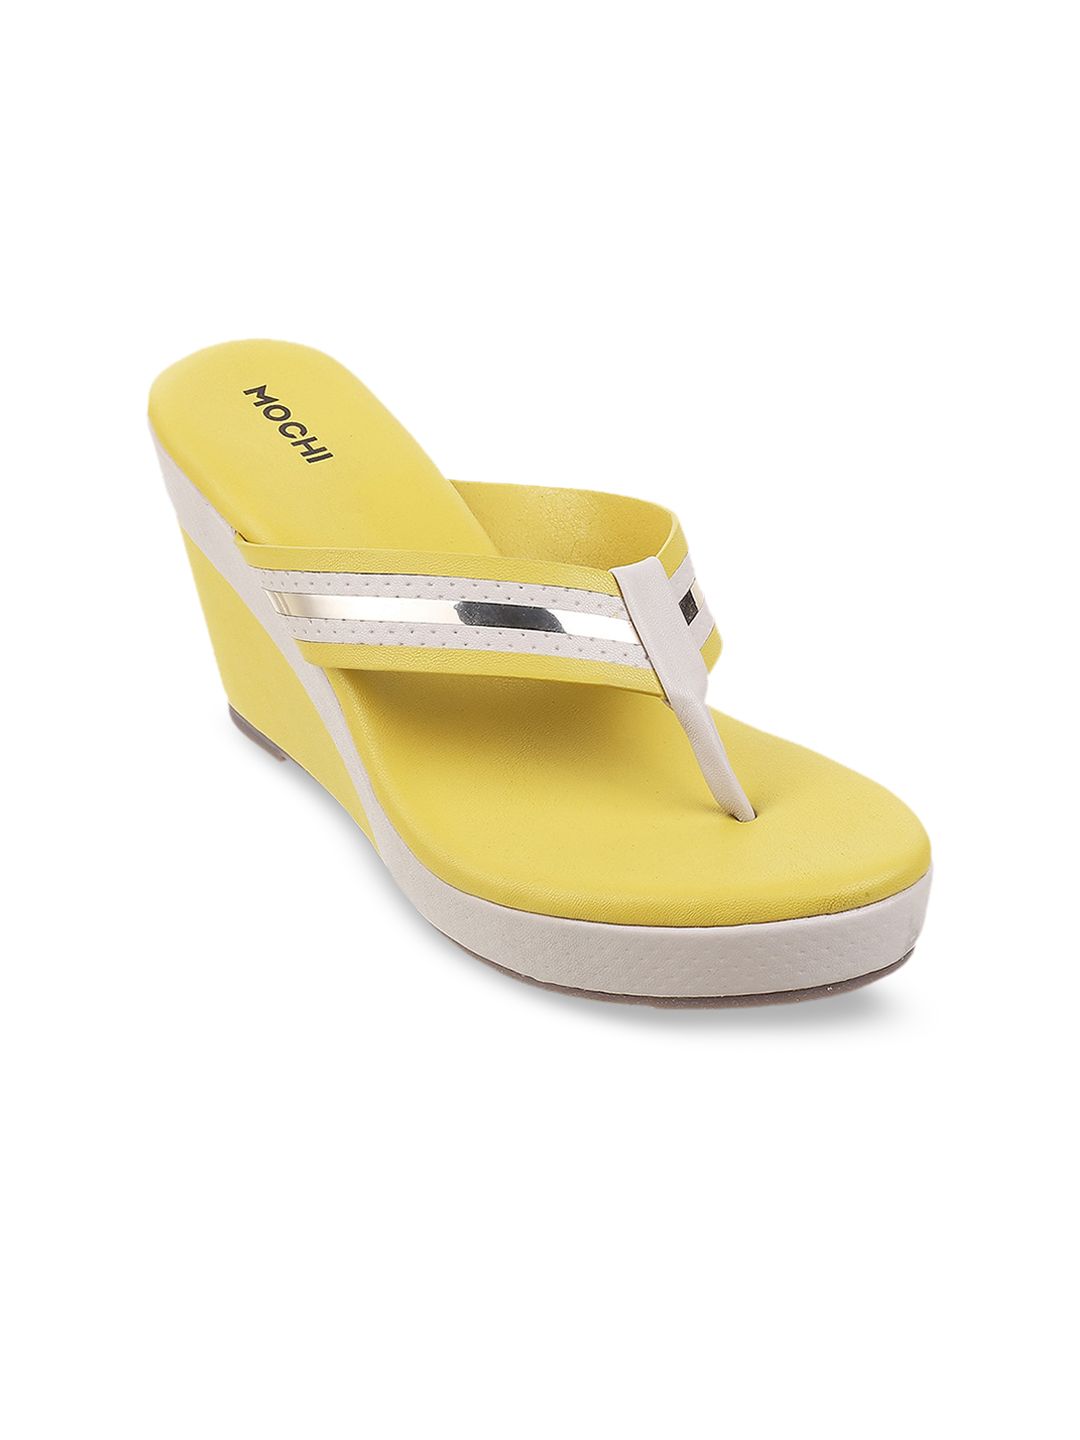 Mochi Yellow Colourblocked Wedge Sandals Price in India